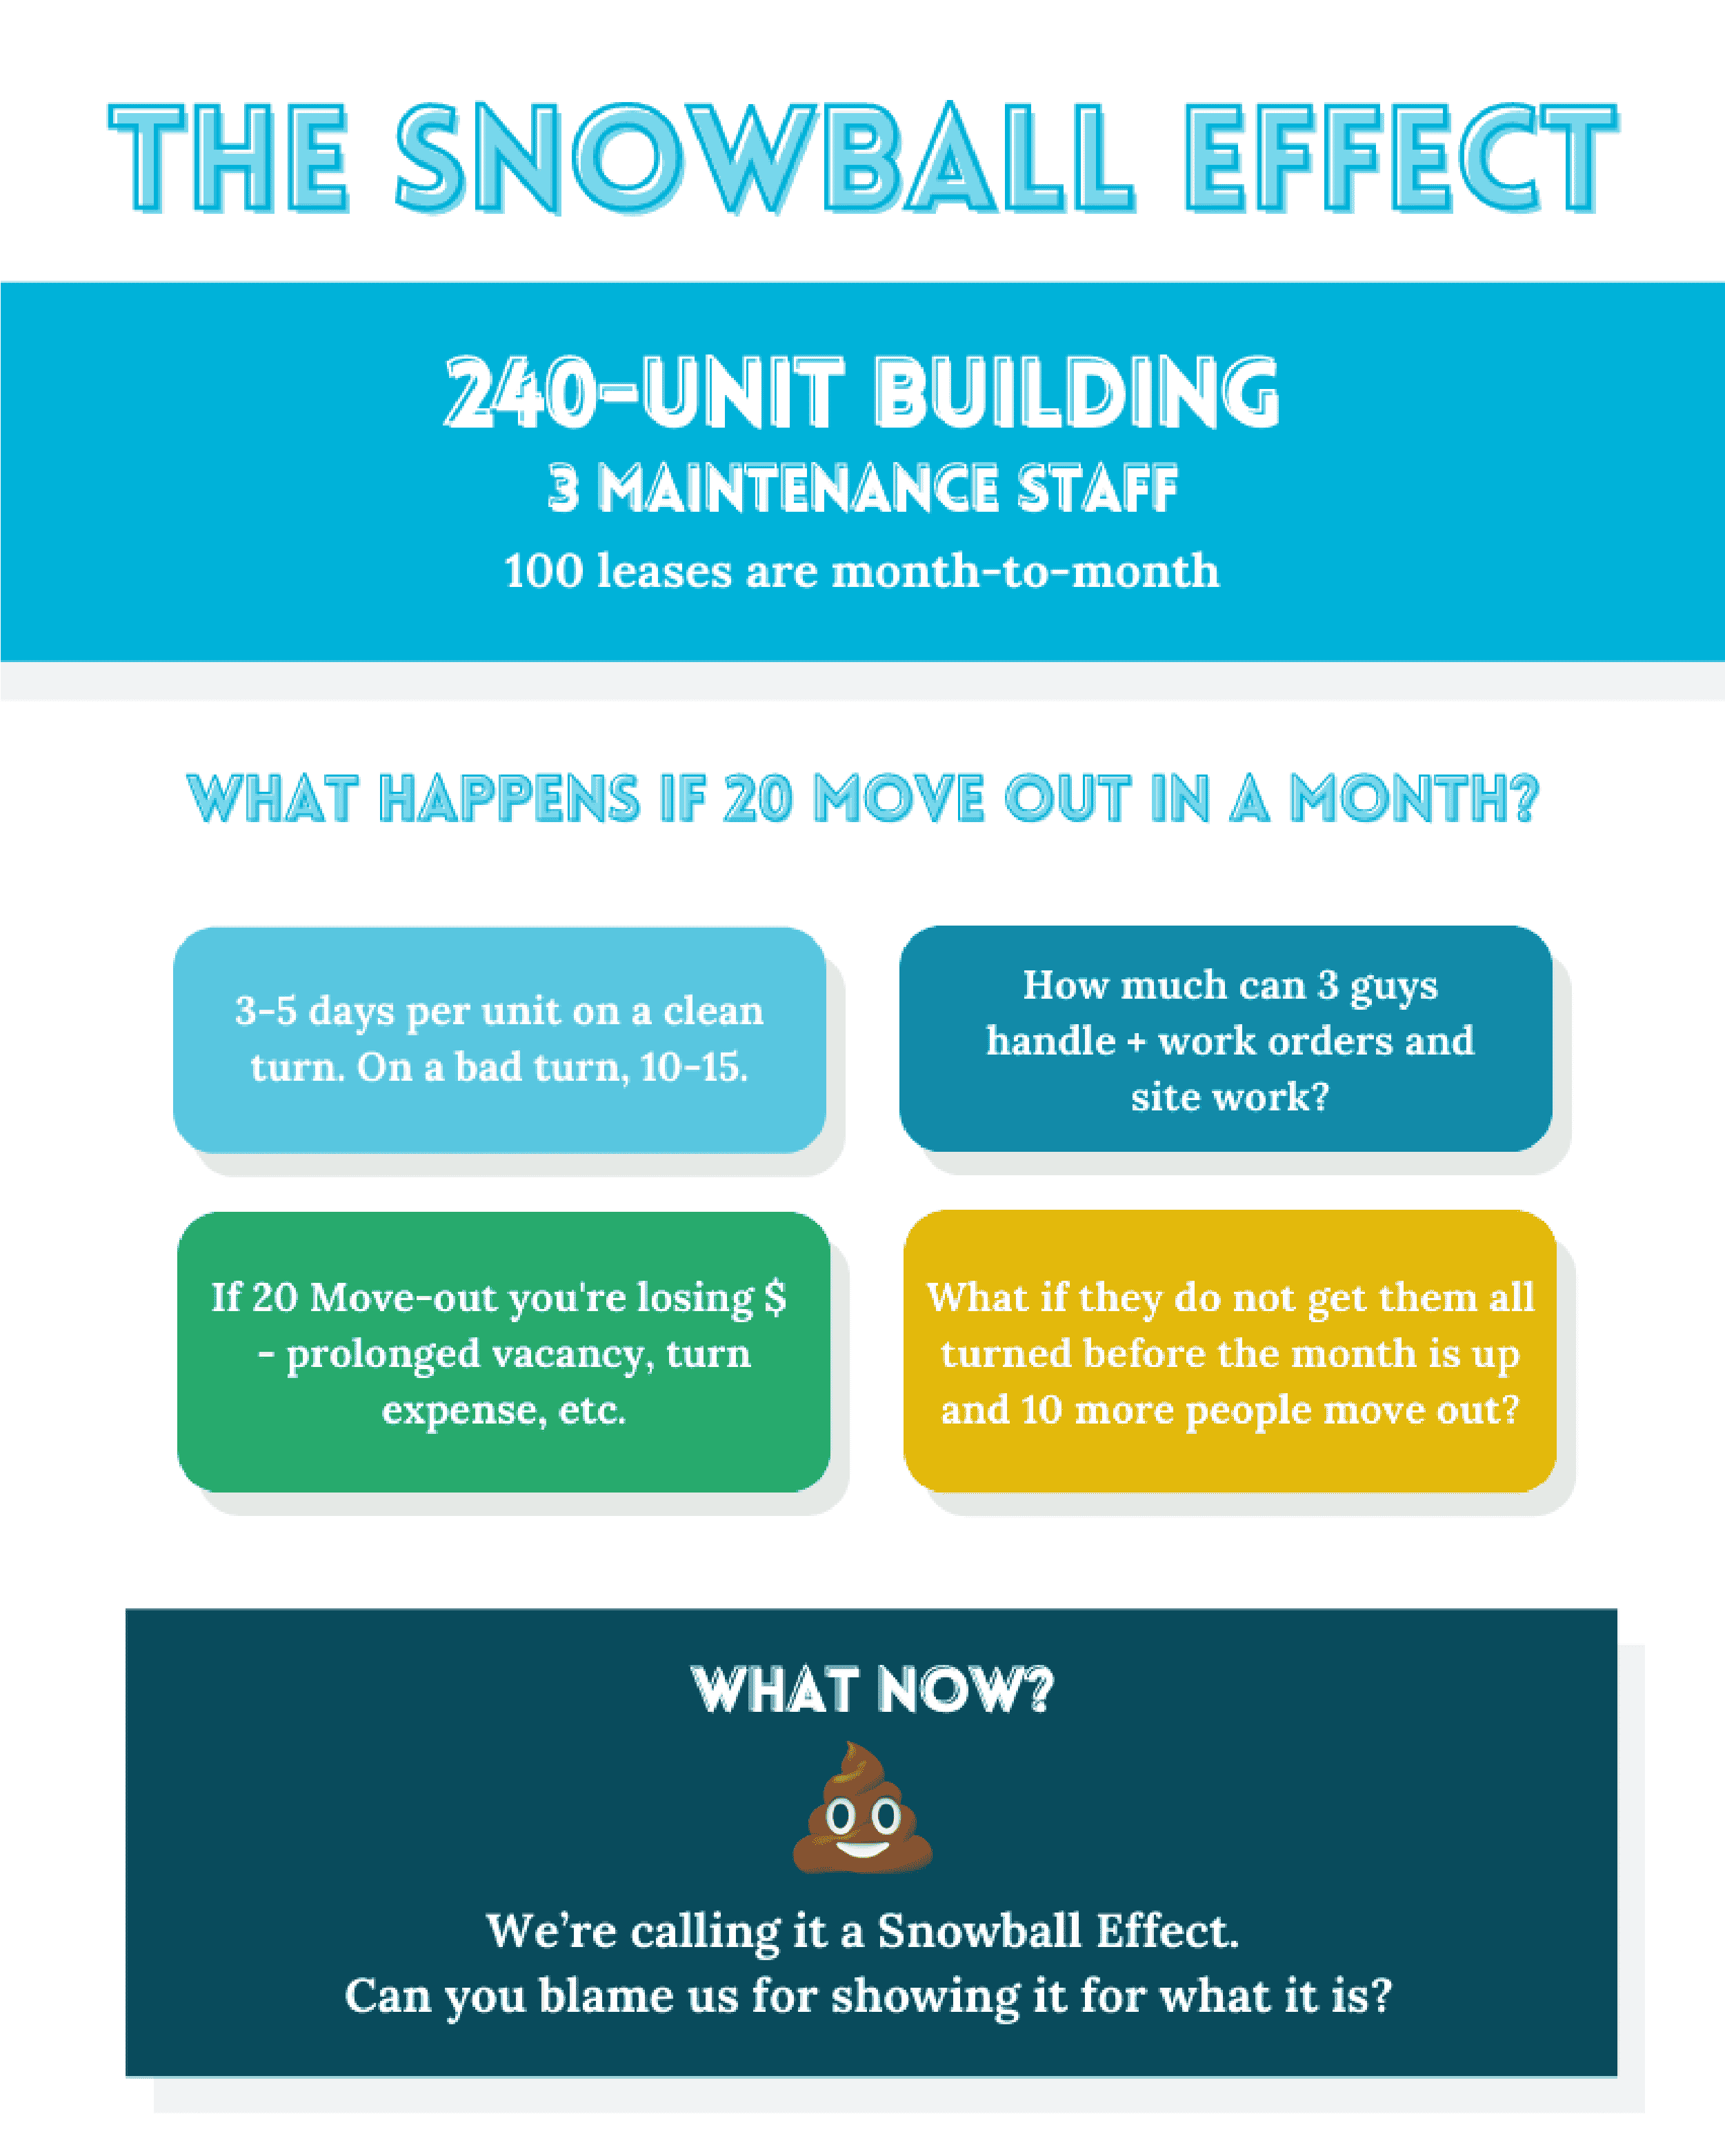 The Snowball Effect 240-unit building with 3 maintenance staff 100 leases are month to month What happens if 20 move out in a month? 3-5 days per unit on a clean turn. On a bad turn, 10-15. How much can 3 guys handle + work orders and site work? If 20 Move-out your losing $ - prolonged vacancy, turn expense, etc. What if they do not get them all turned before the month is up and 10 more people move out? What now? Poop emoji We’re calling it a Snowball Effect, but can you blame us for showing it for what it is?